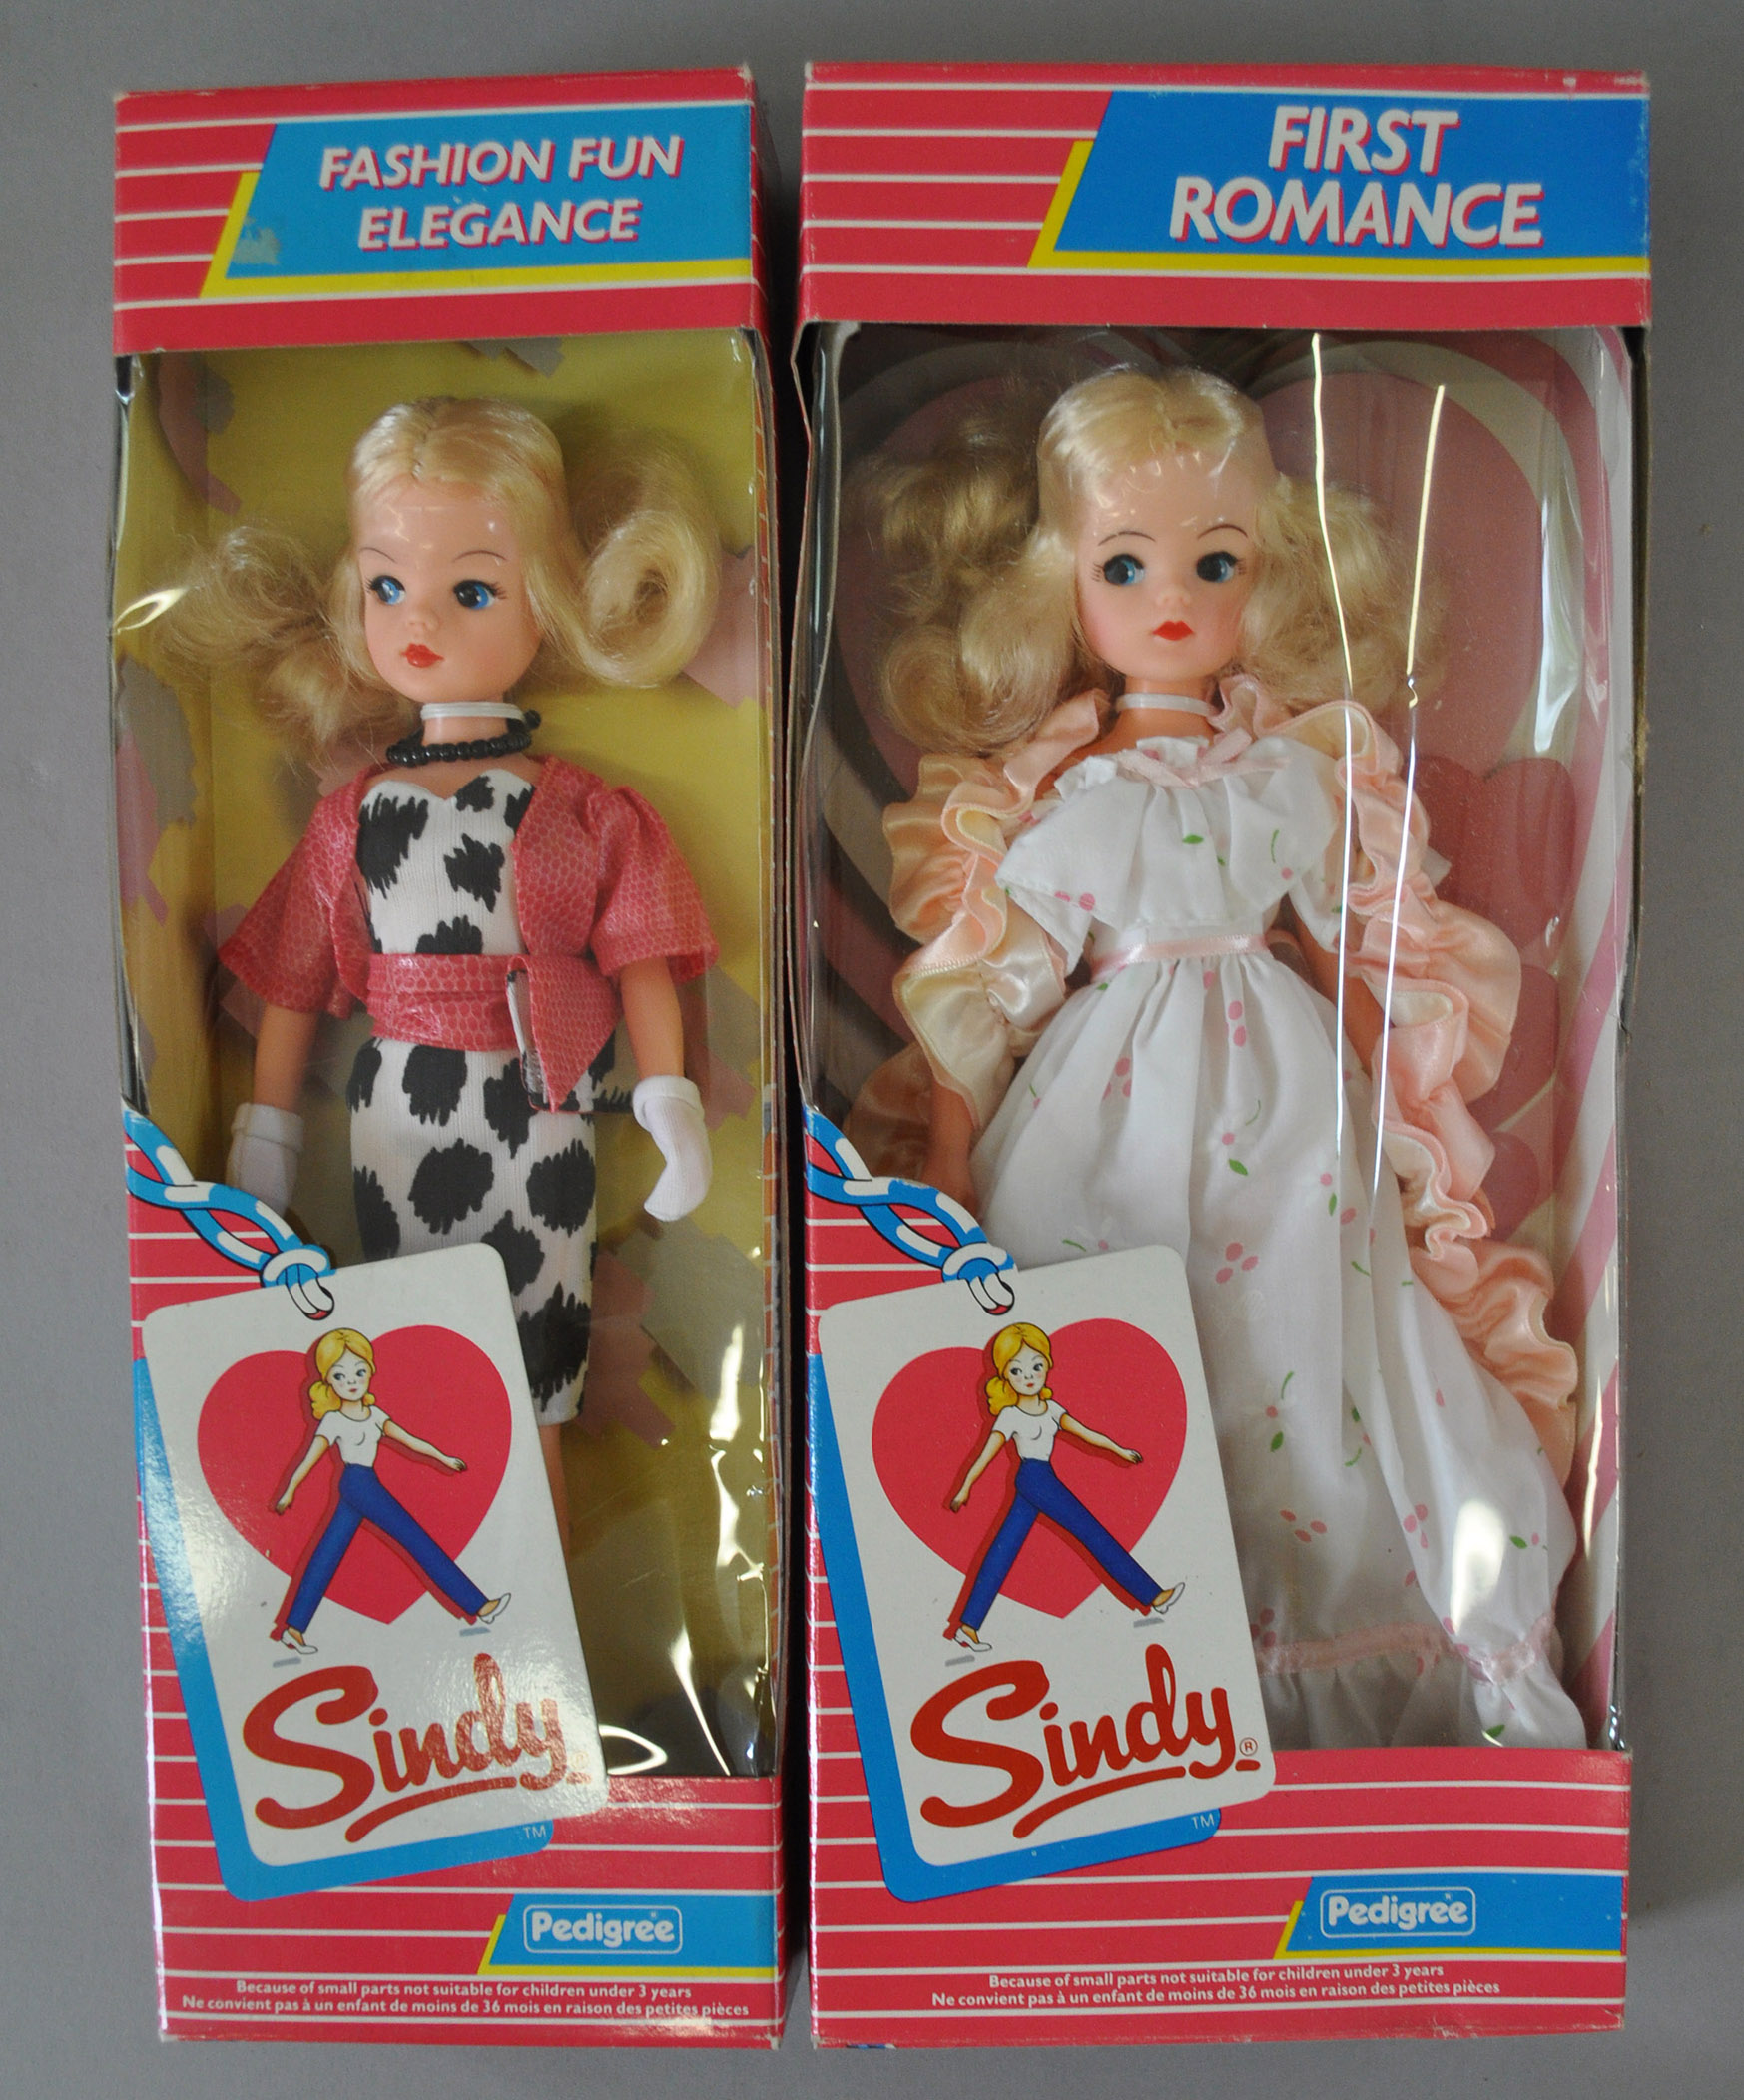 Pedigree Sindy #42019 First Romance: blonde hair, white frilly dress with ruched pink stole and